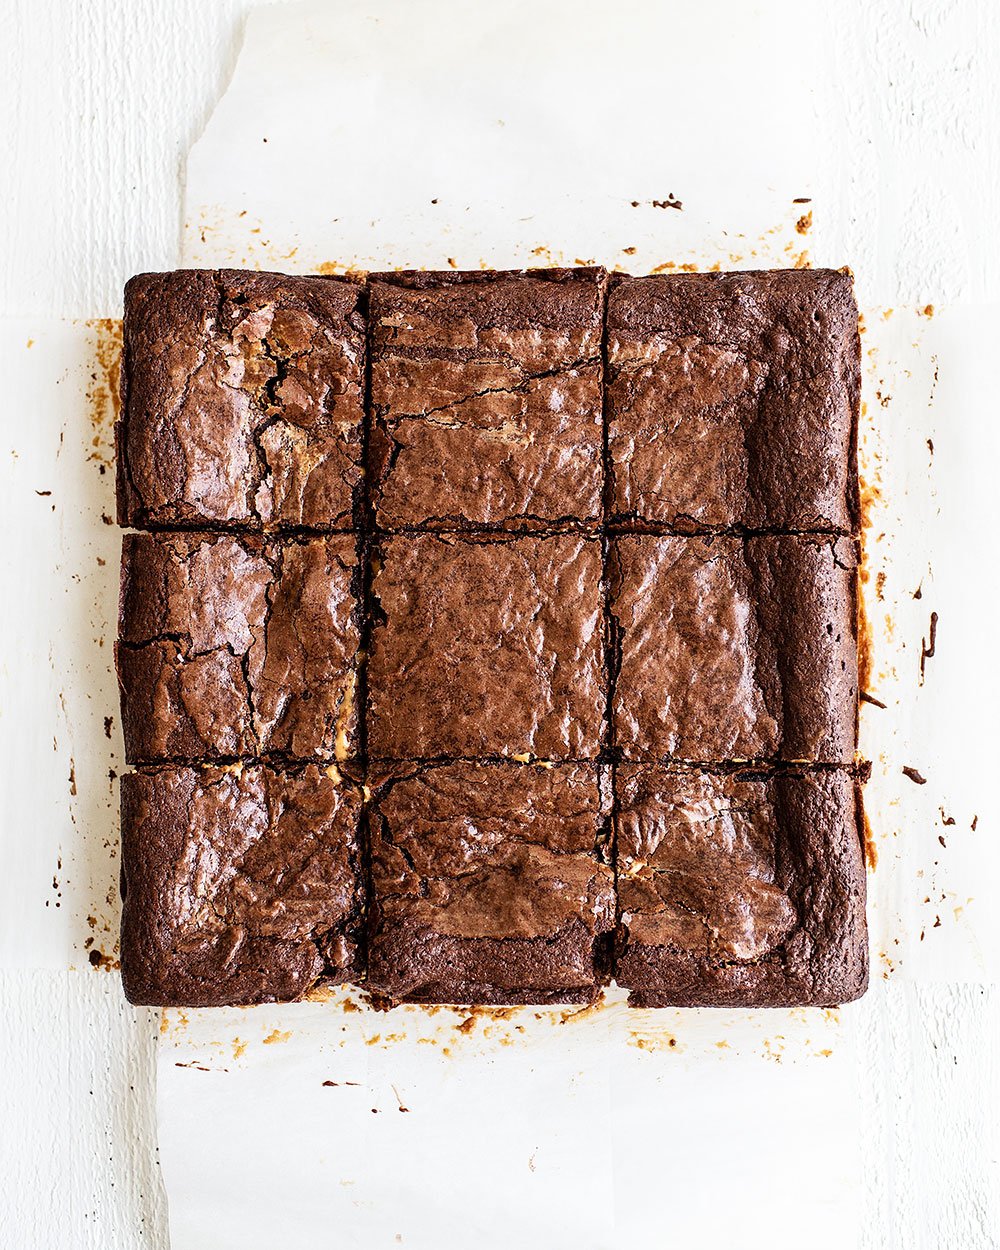 Peanut butter stuffed brownies cut into nine squares